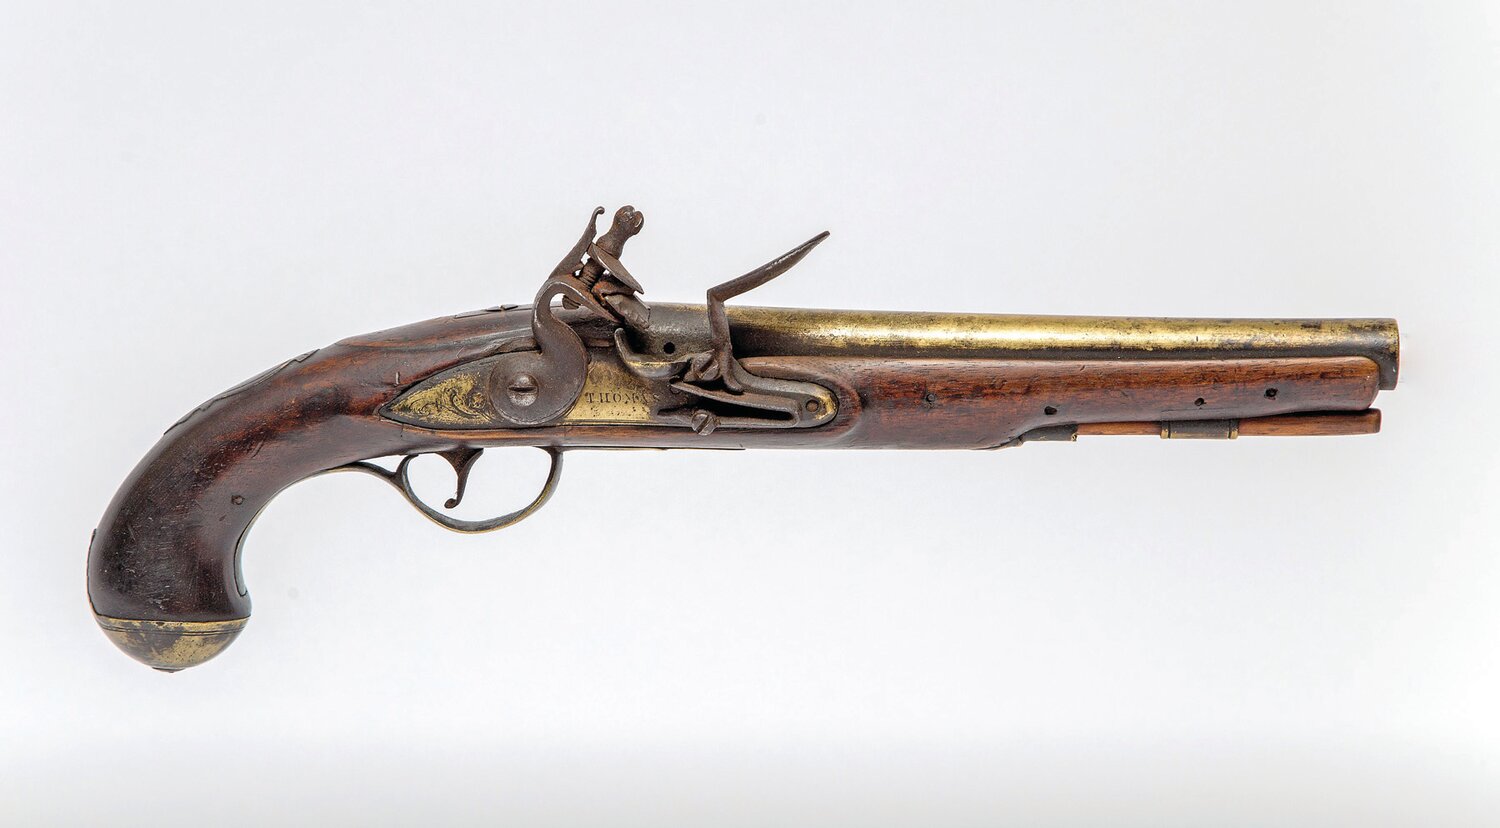 The flintlock pistol found at the site of the Halsey’s Cabin shoot-out in 1783, on loan courtesy of Clint Flack.